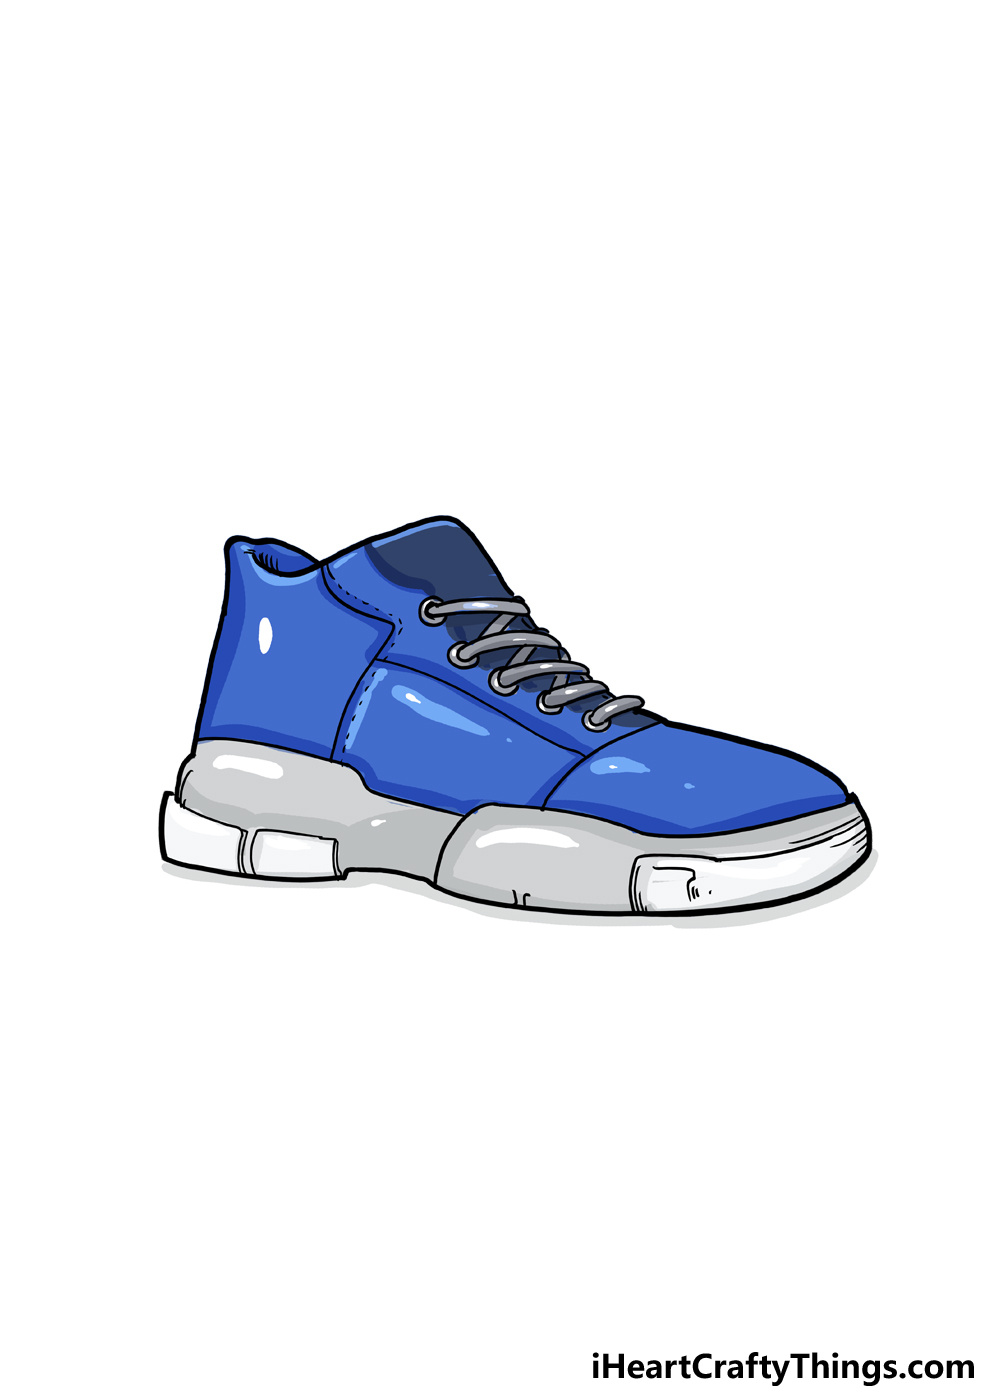 How to Draw A Shoe step 6